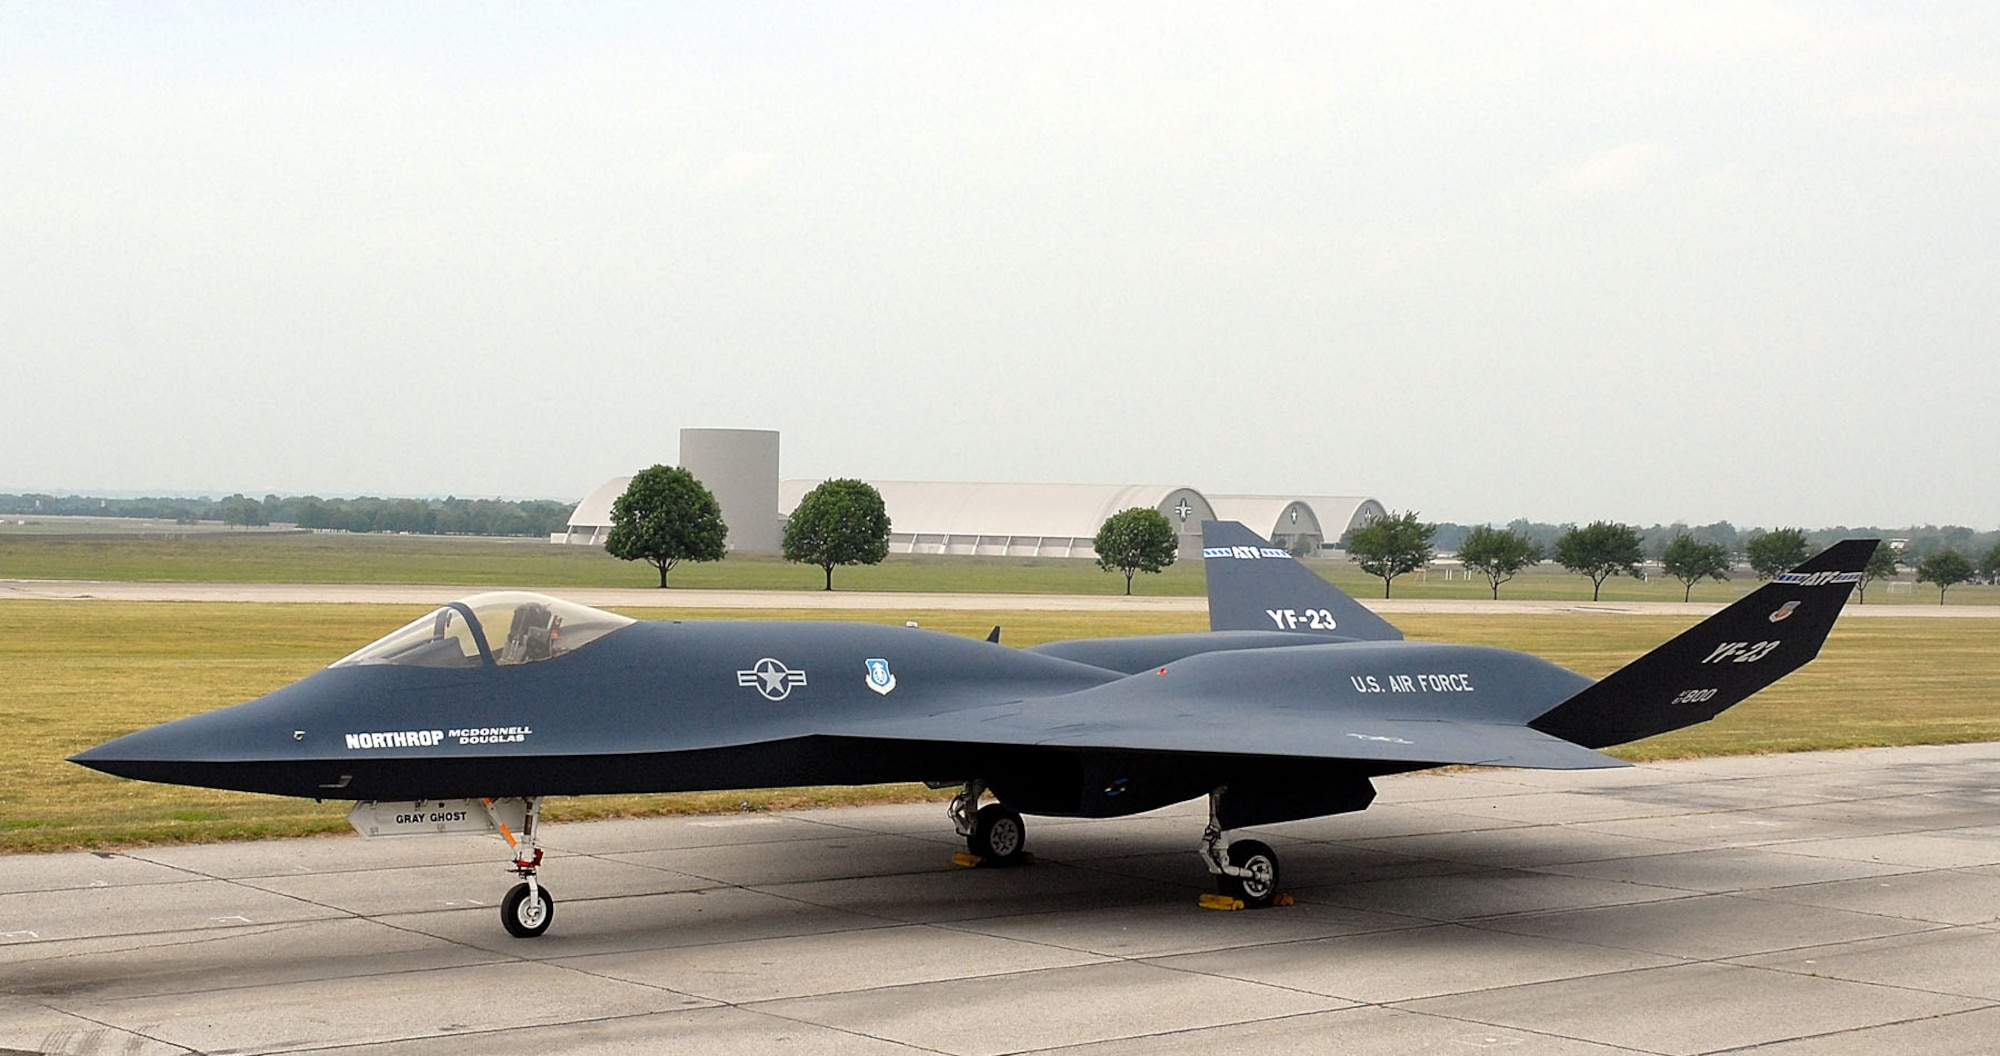 DAYTON, Ohio -- Northrop-McDonnell Douglas YF-23 at the National Museum of the United States Air Force. (U.S. Air Force photo)